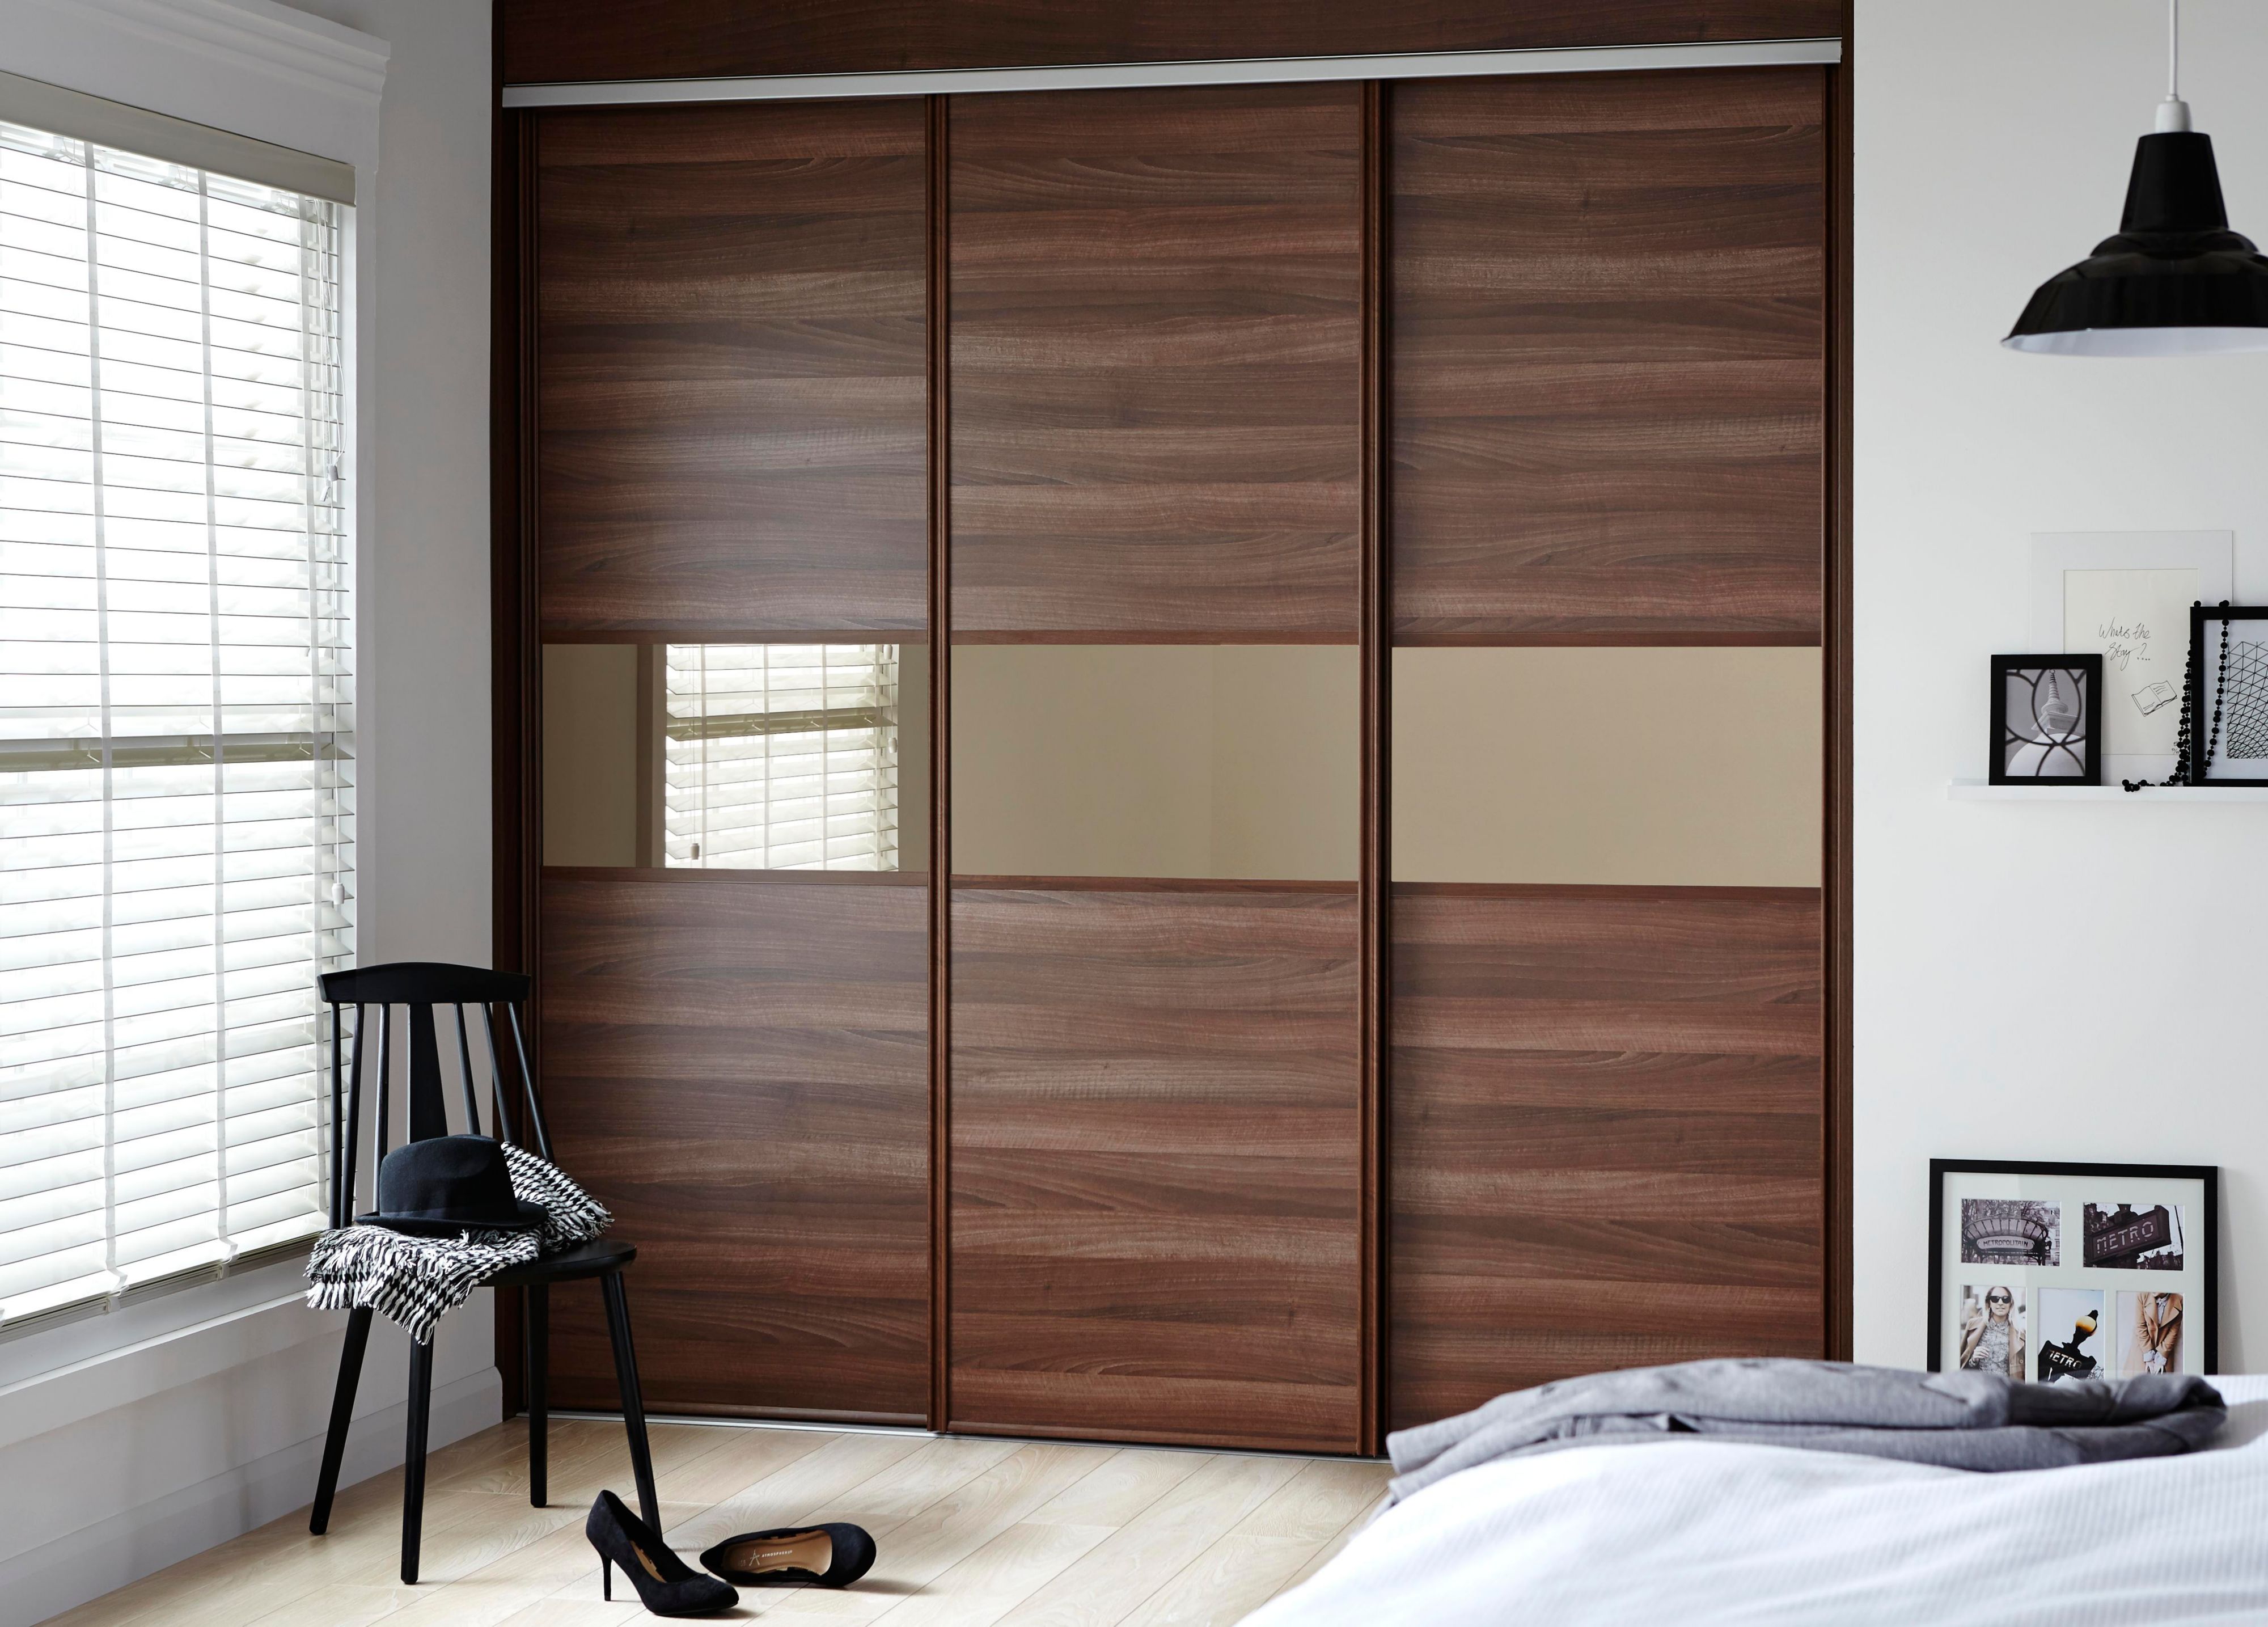 Sliding door wardrobe – an amazing place to keep things